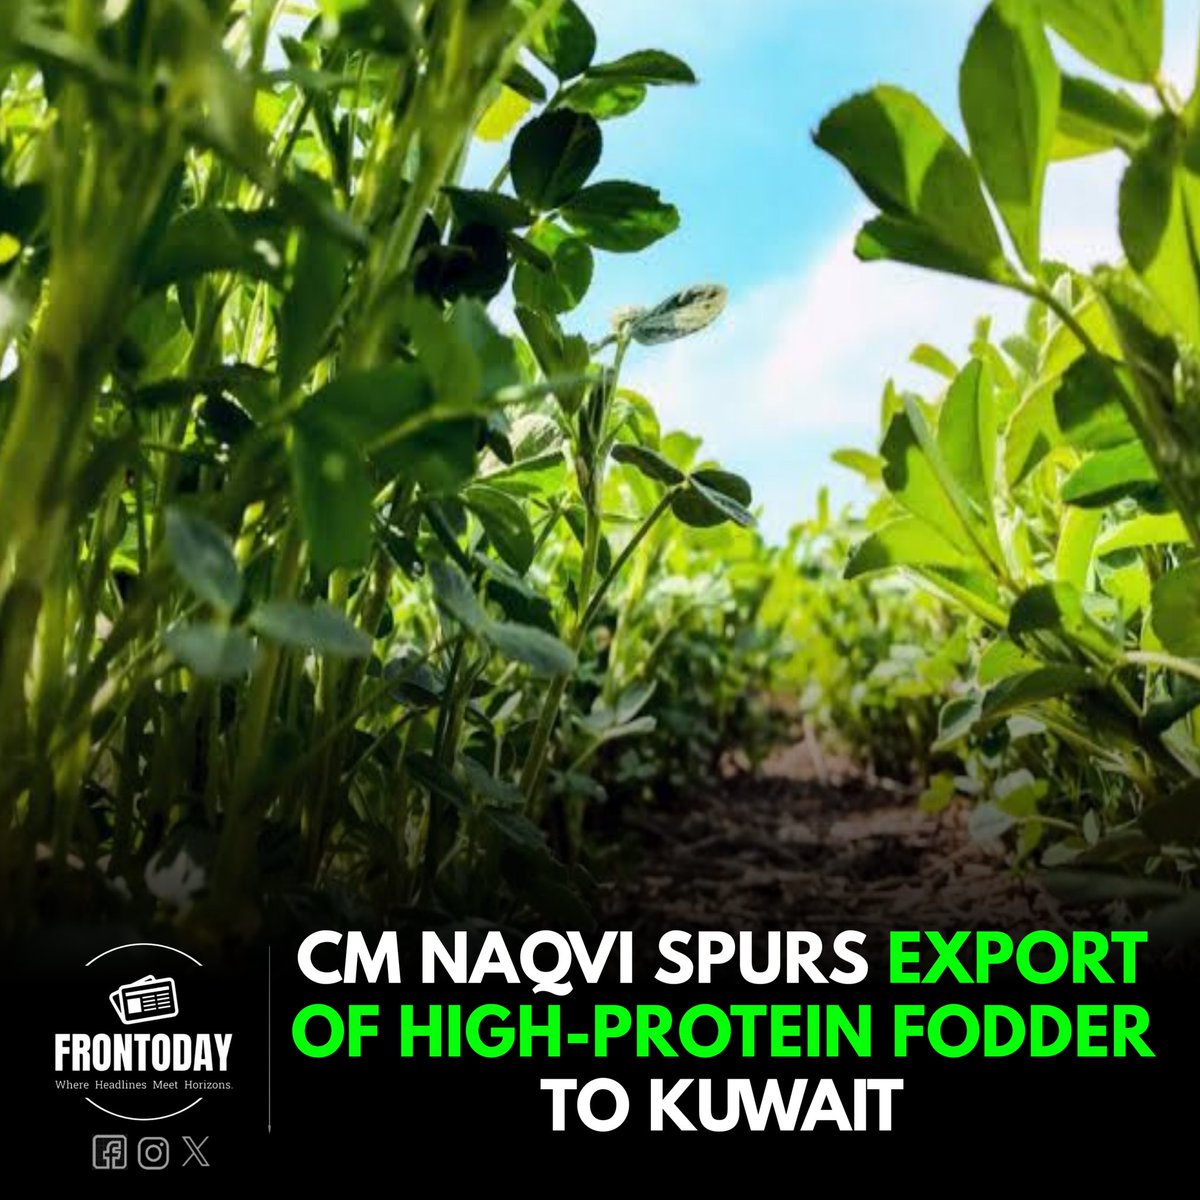 Exciting News from Punjab! CM Mohsin Naqvi's decisive move to export high-protein alfalfa fodder to Kuwait is a game-changer for agriculture. Boosting livestock development, innovation in farming, and potential beef & mutton exports! #PunjabExports #LivestockDevelopment